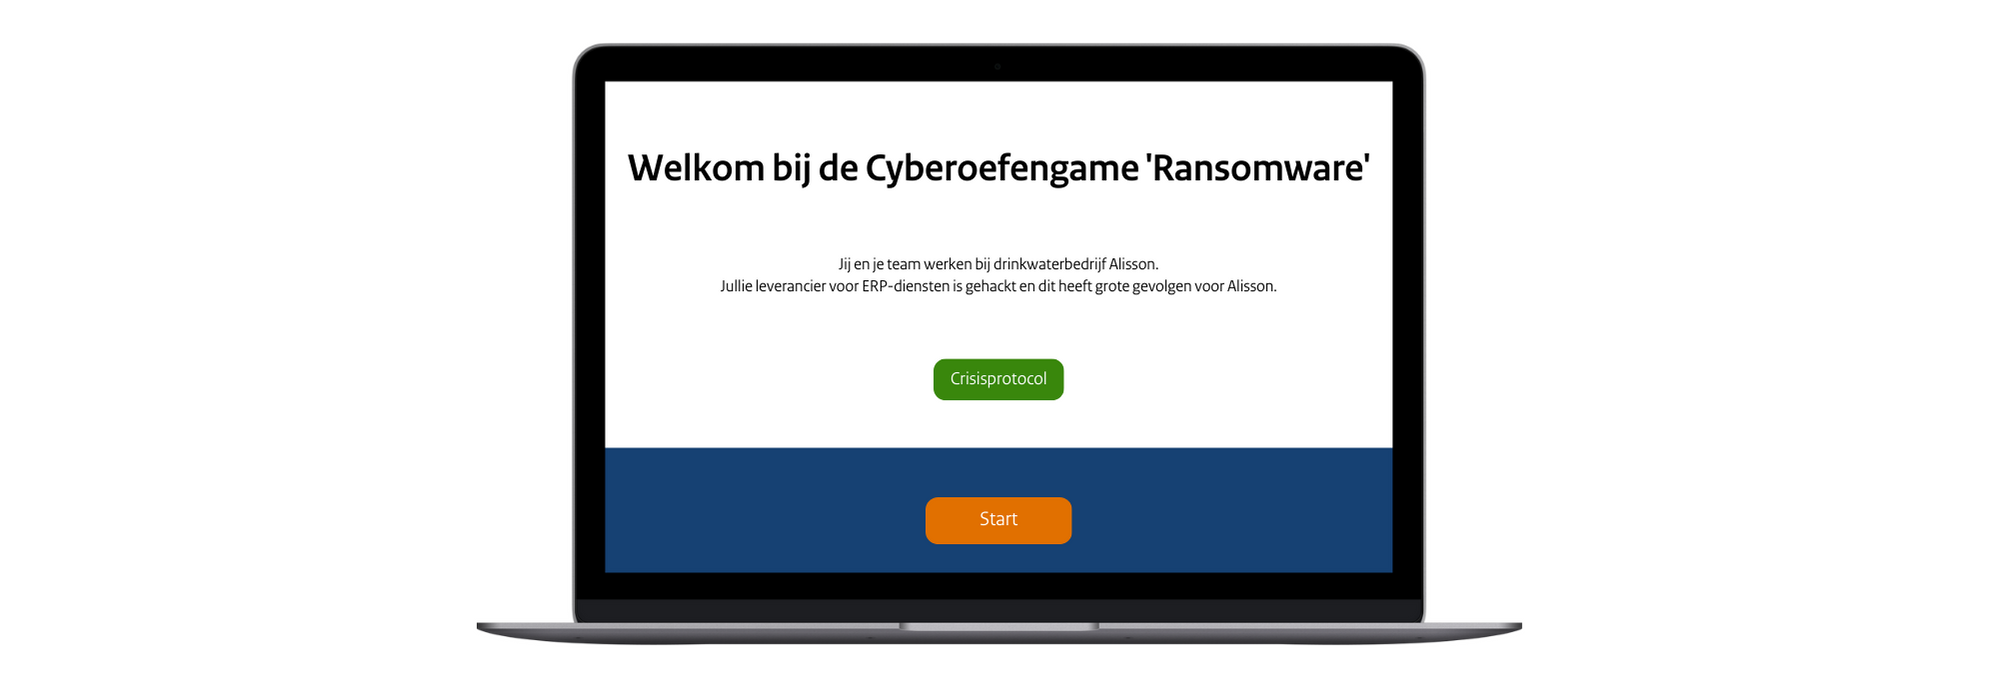 Cyberoefengame_ransom